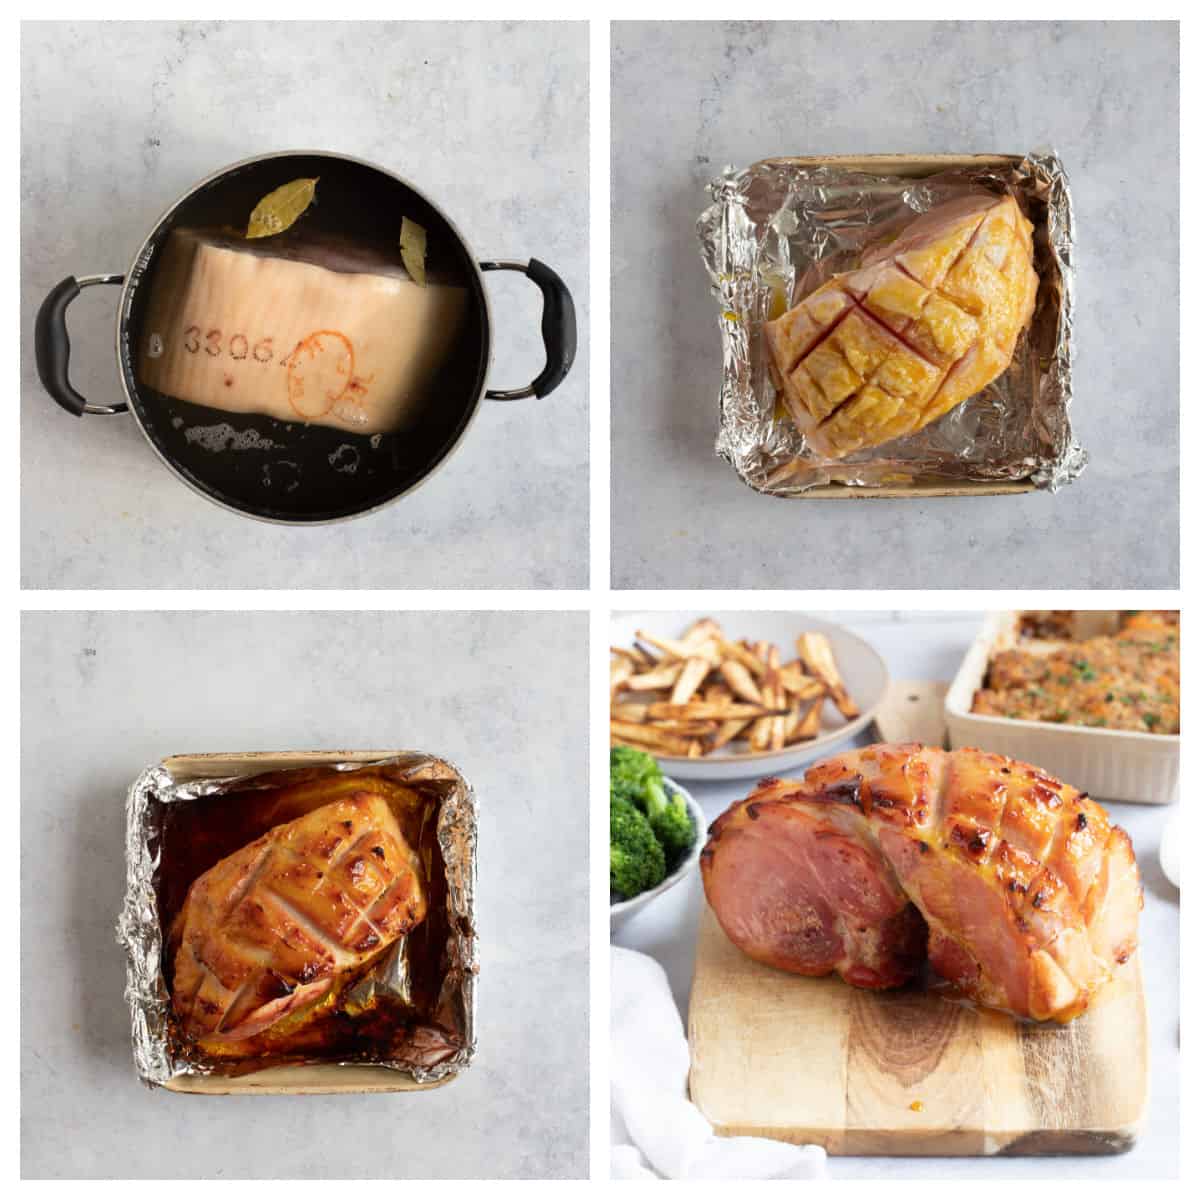 Step by step process photos for making honey roast gammon.